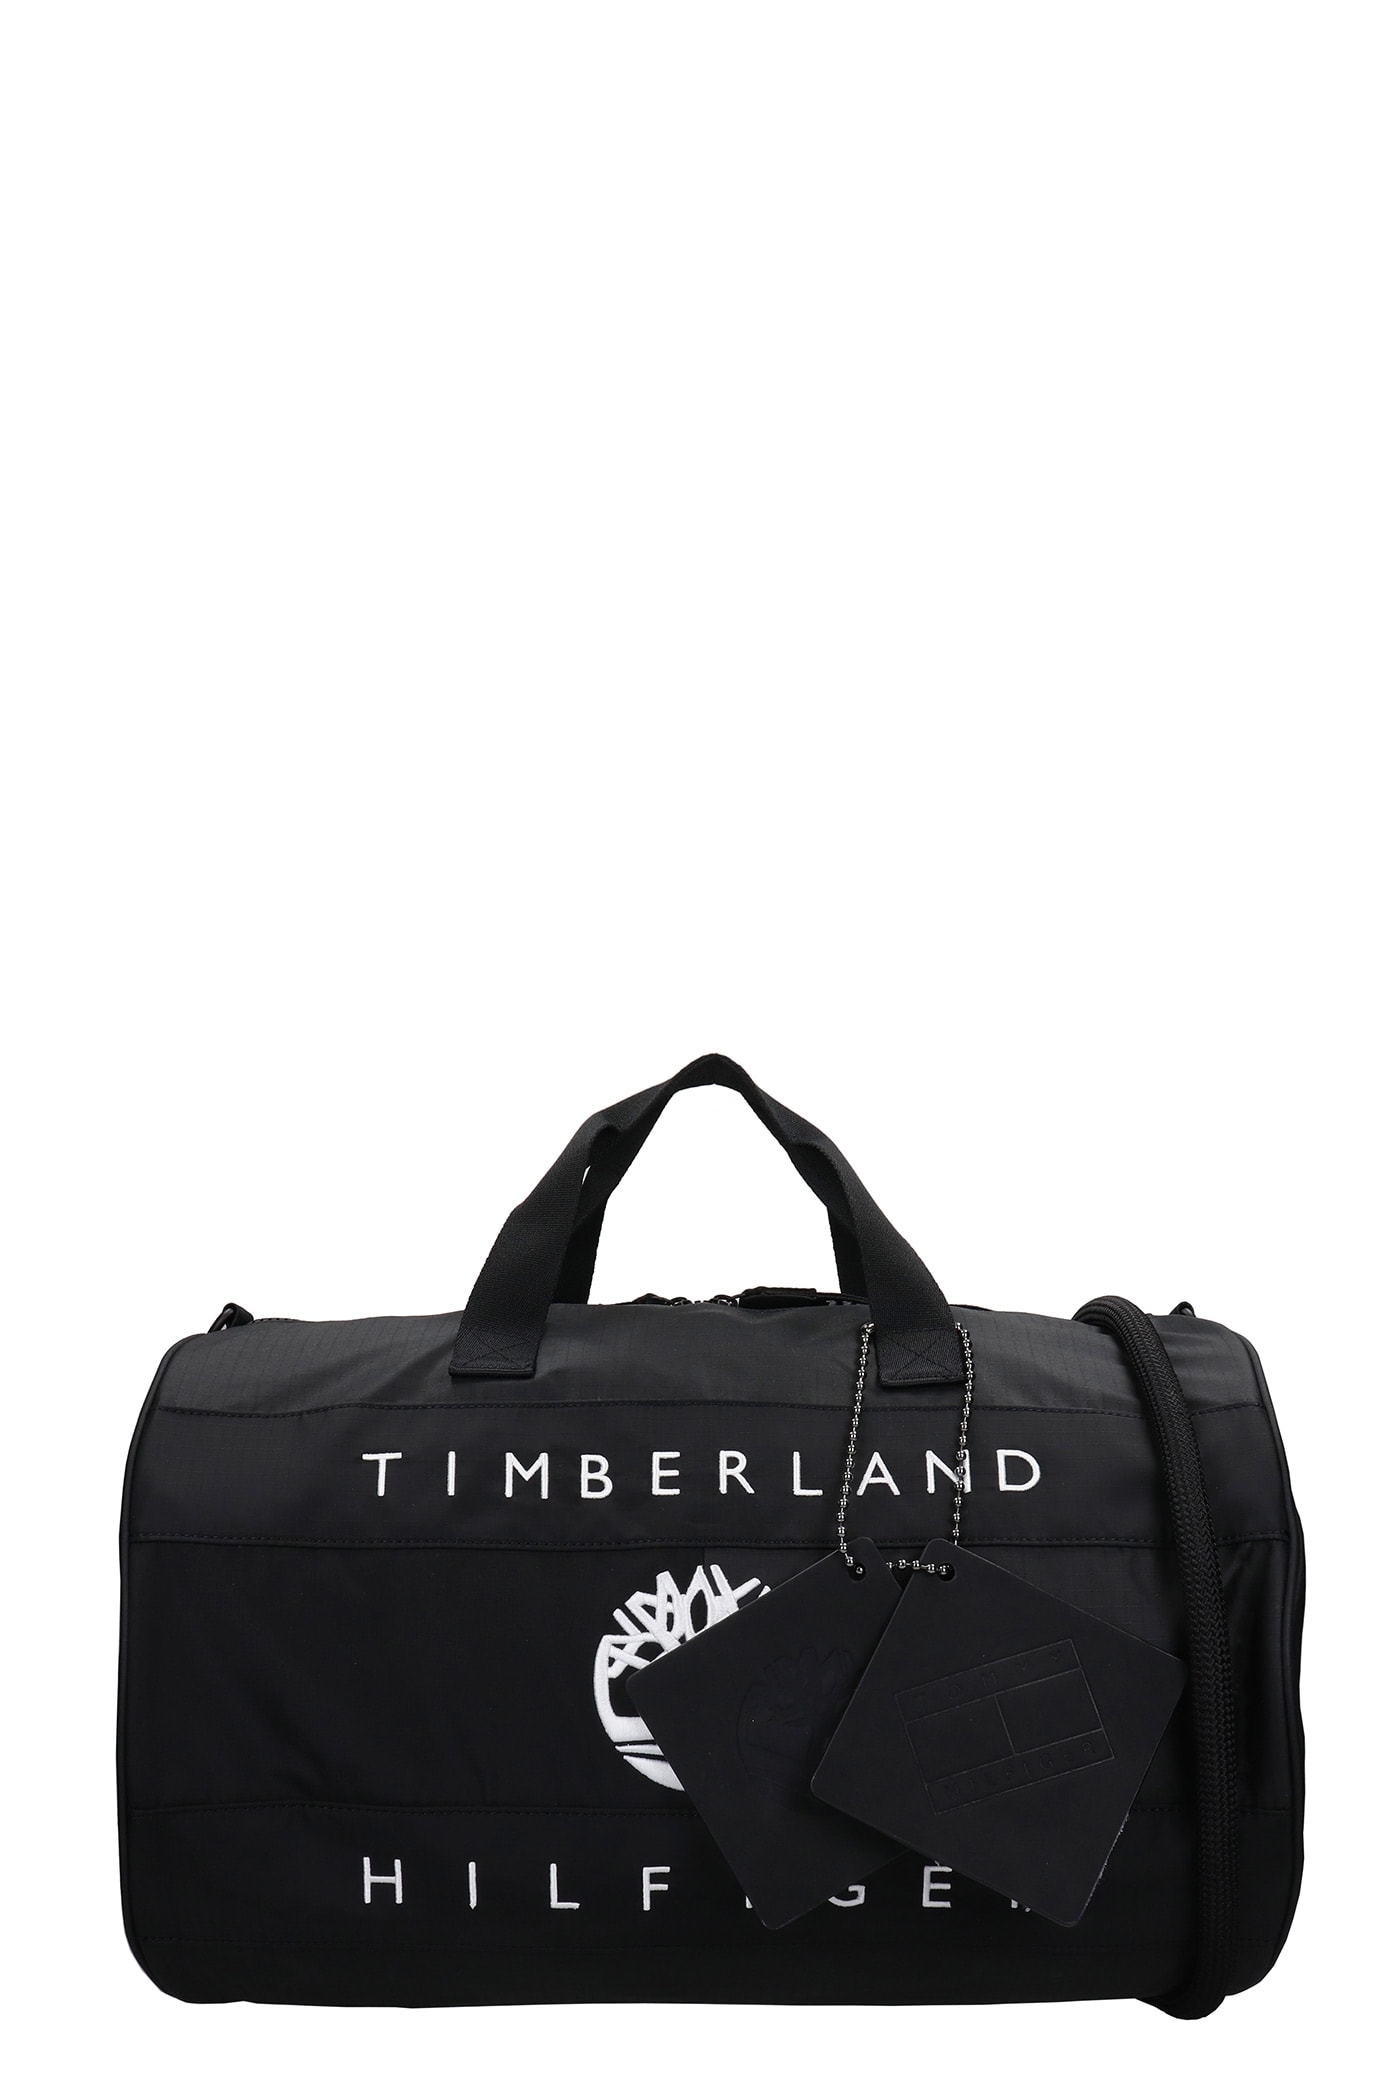 Timberland Hand Bag In Black Synthetic Fibers